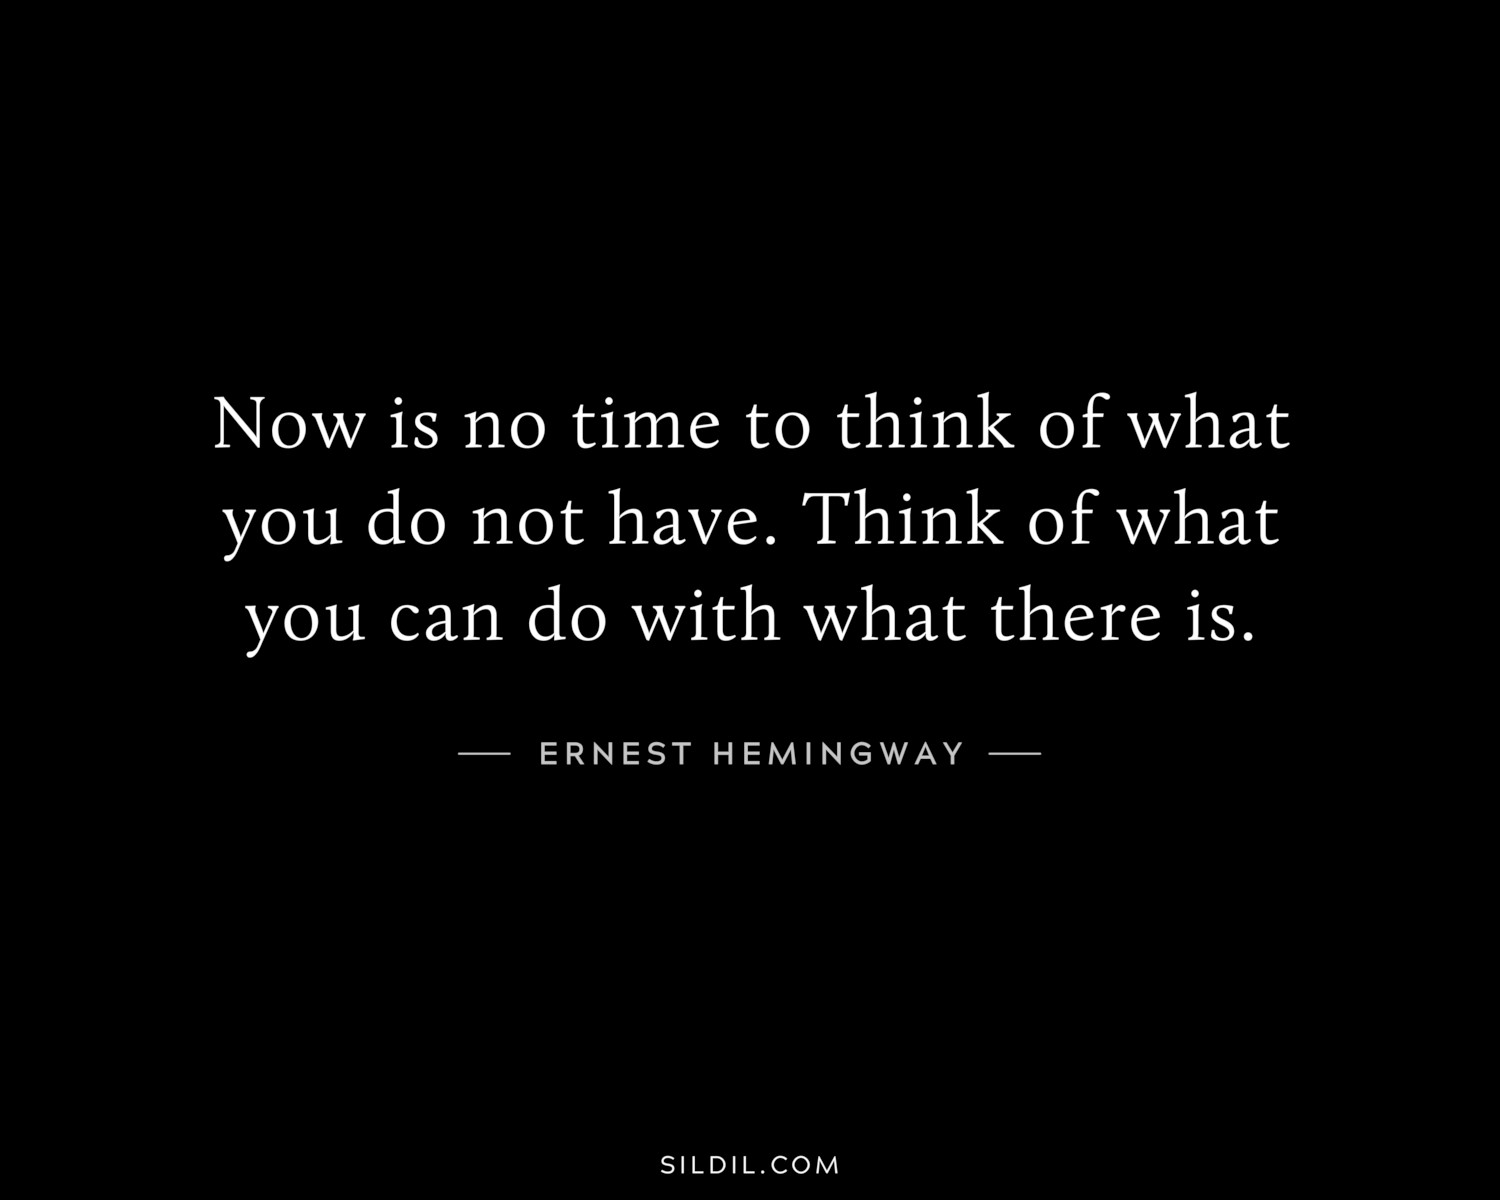 Now is no time to think of what you do not have. Think of what you can do with what there is.